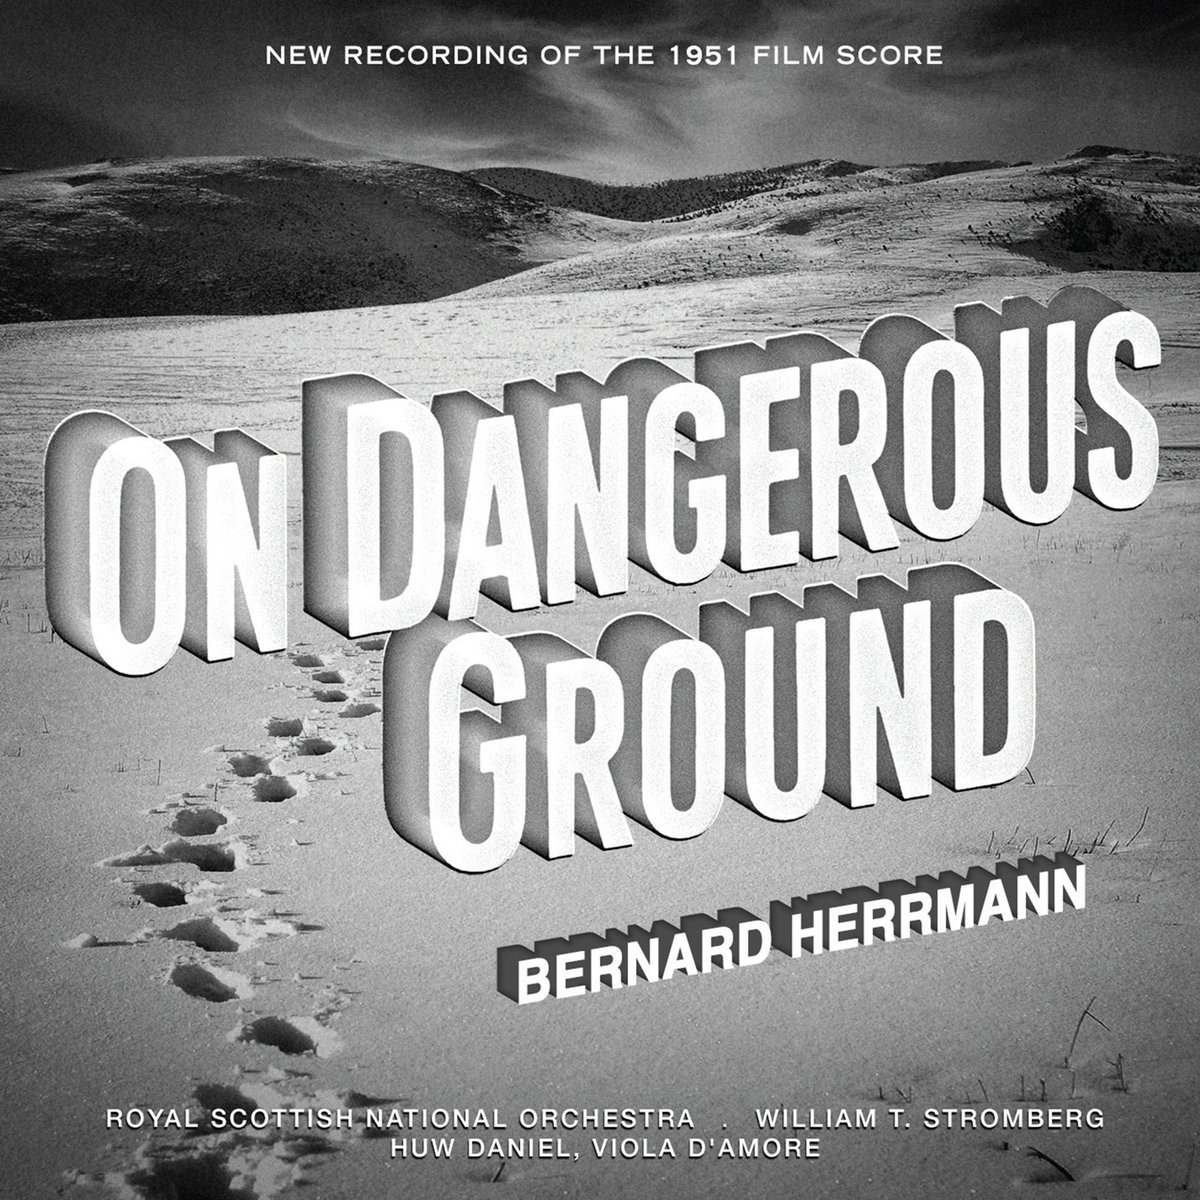 Digital version of new recordings of Bernard Herrmann's scores from 'The Man Who Knew Too Much' & 'On Dangerous Ground' released. bit.ly/41THWv1